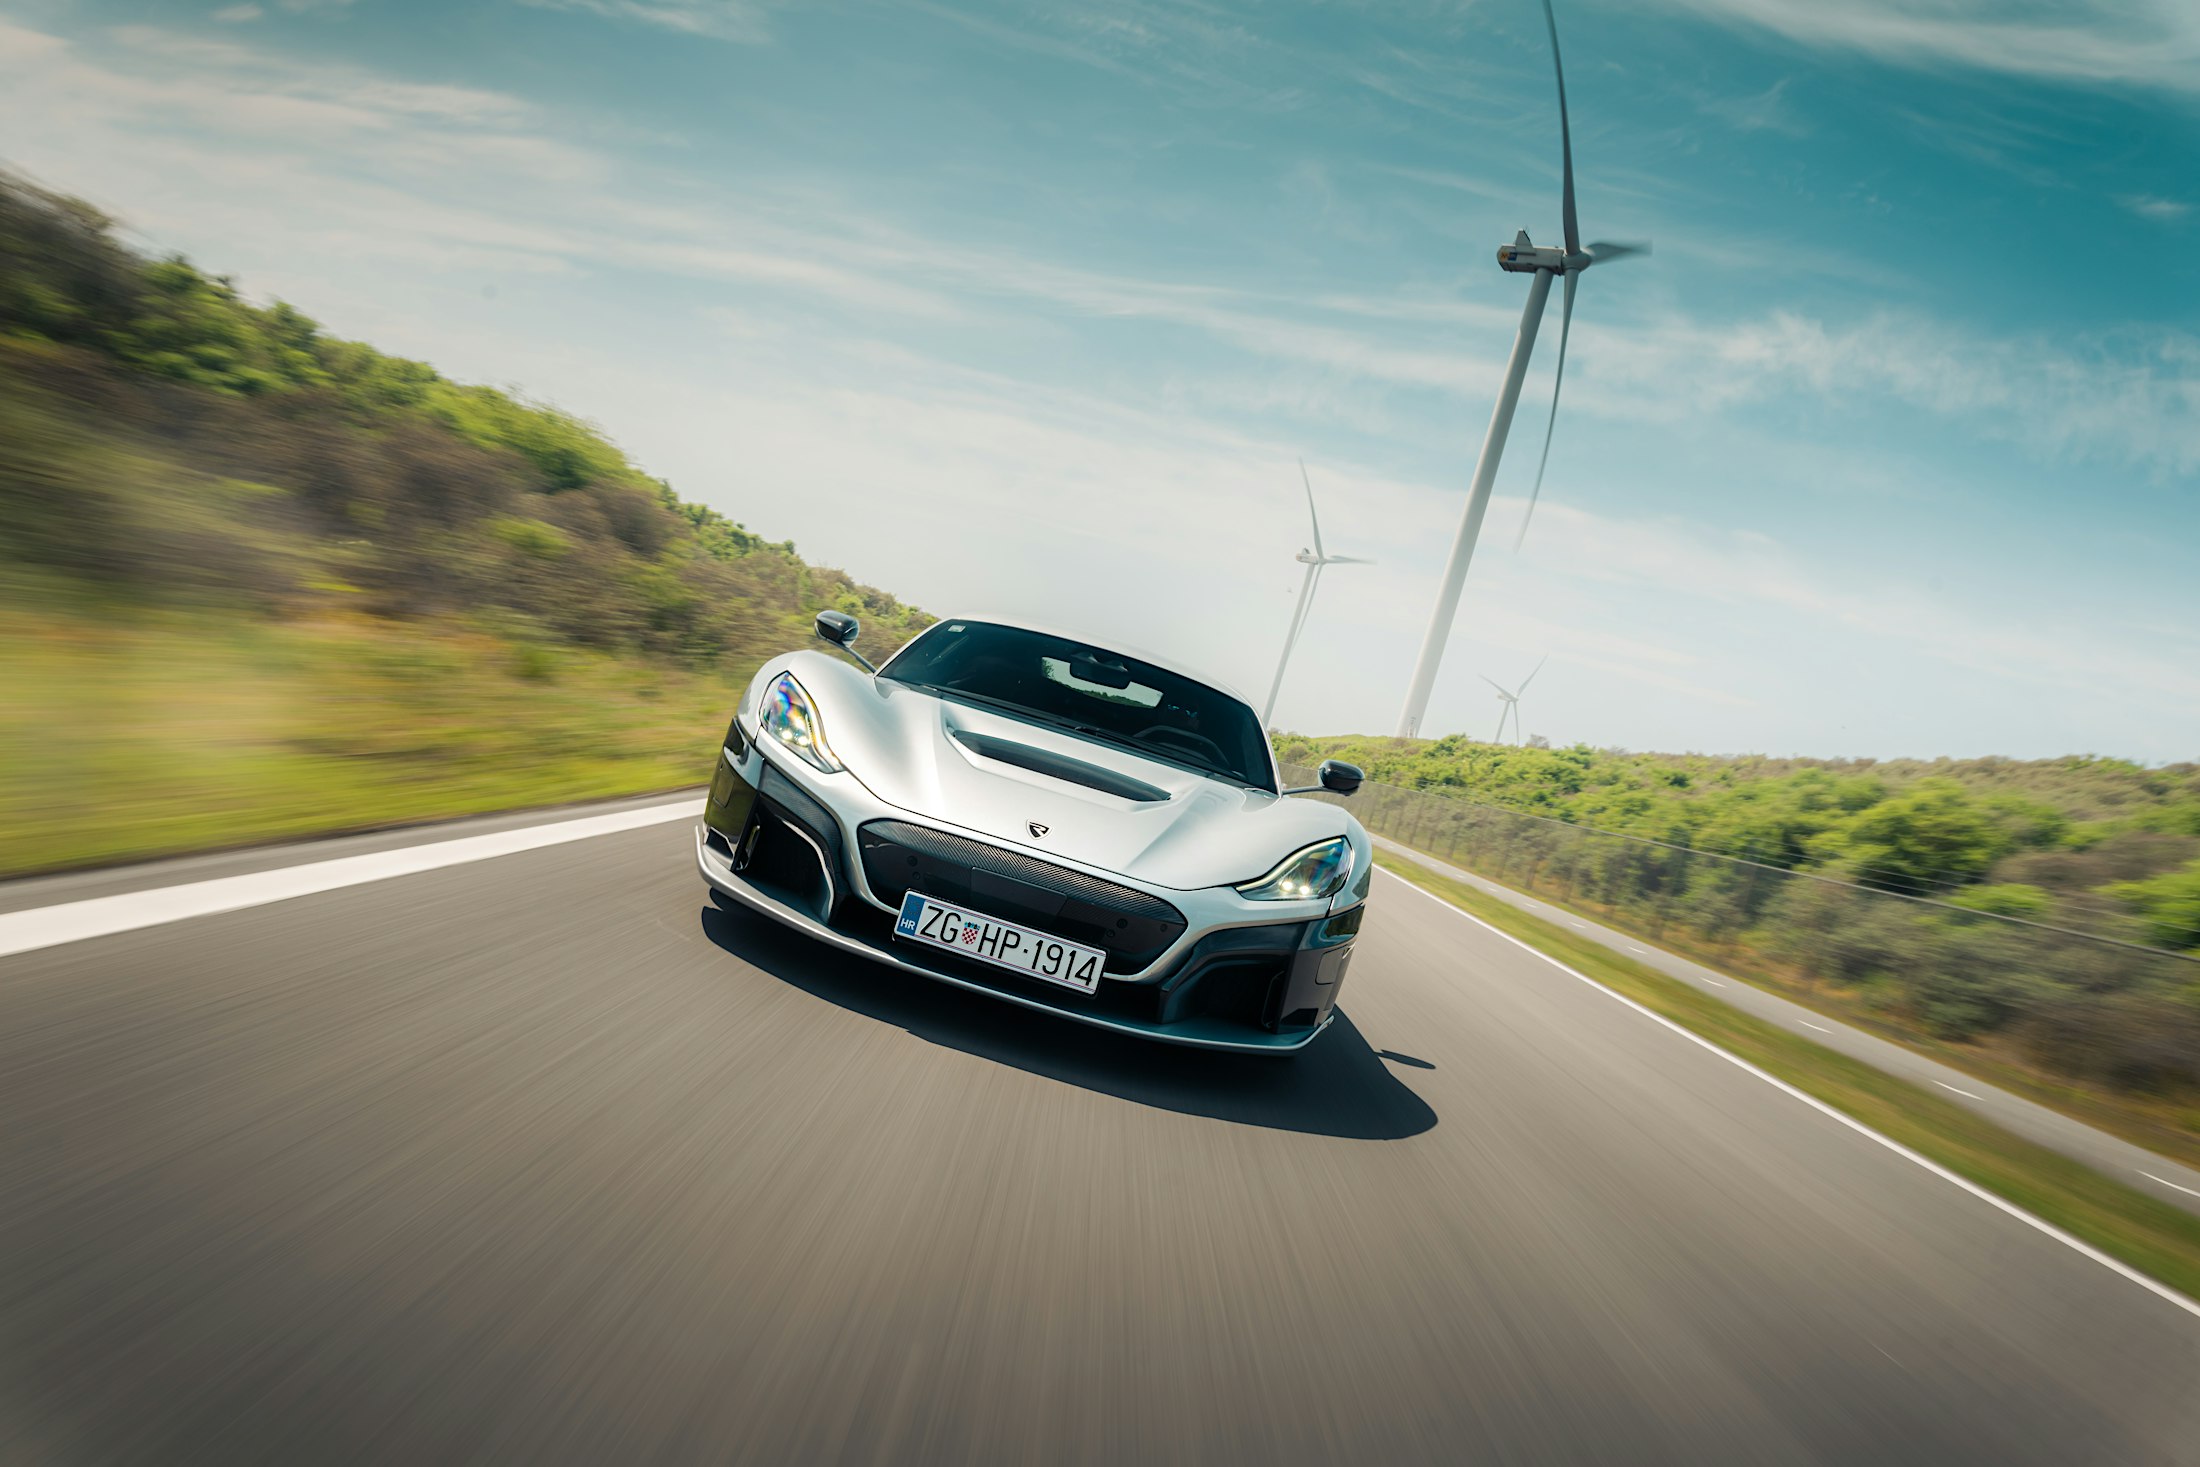 Rimac Automobili partners with Pon to accelerate growth in the Netherlands